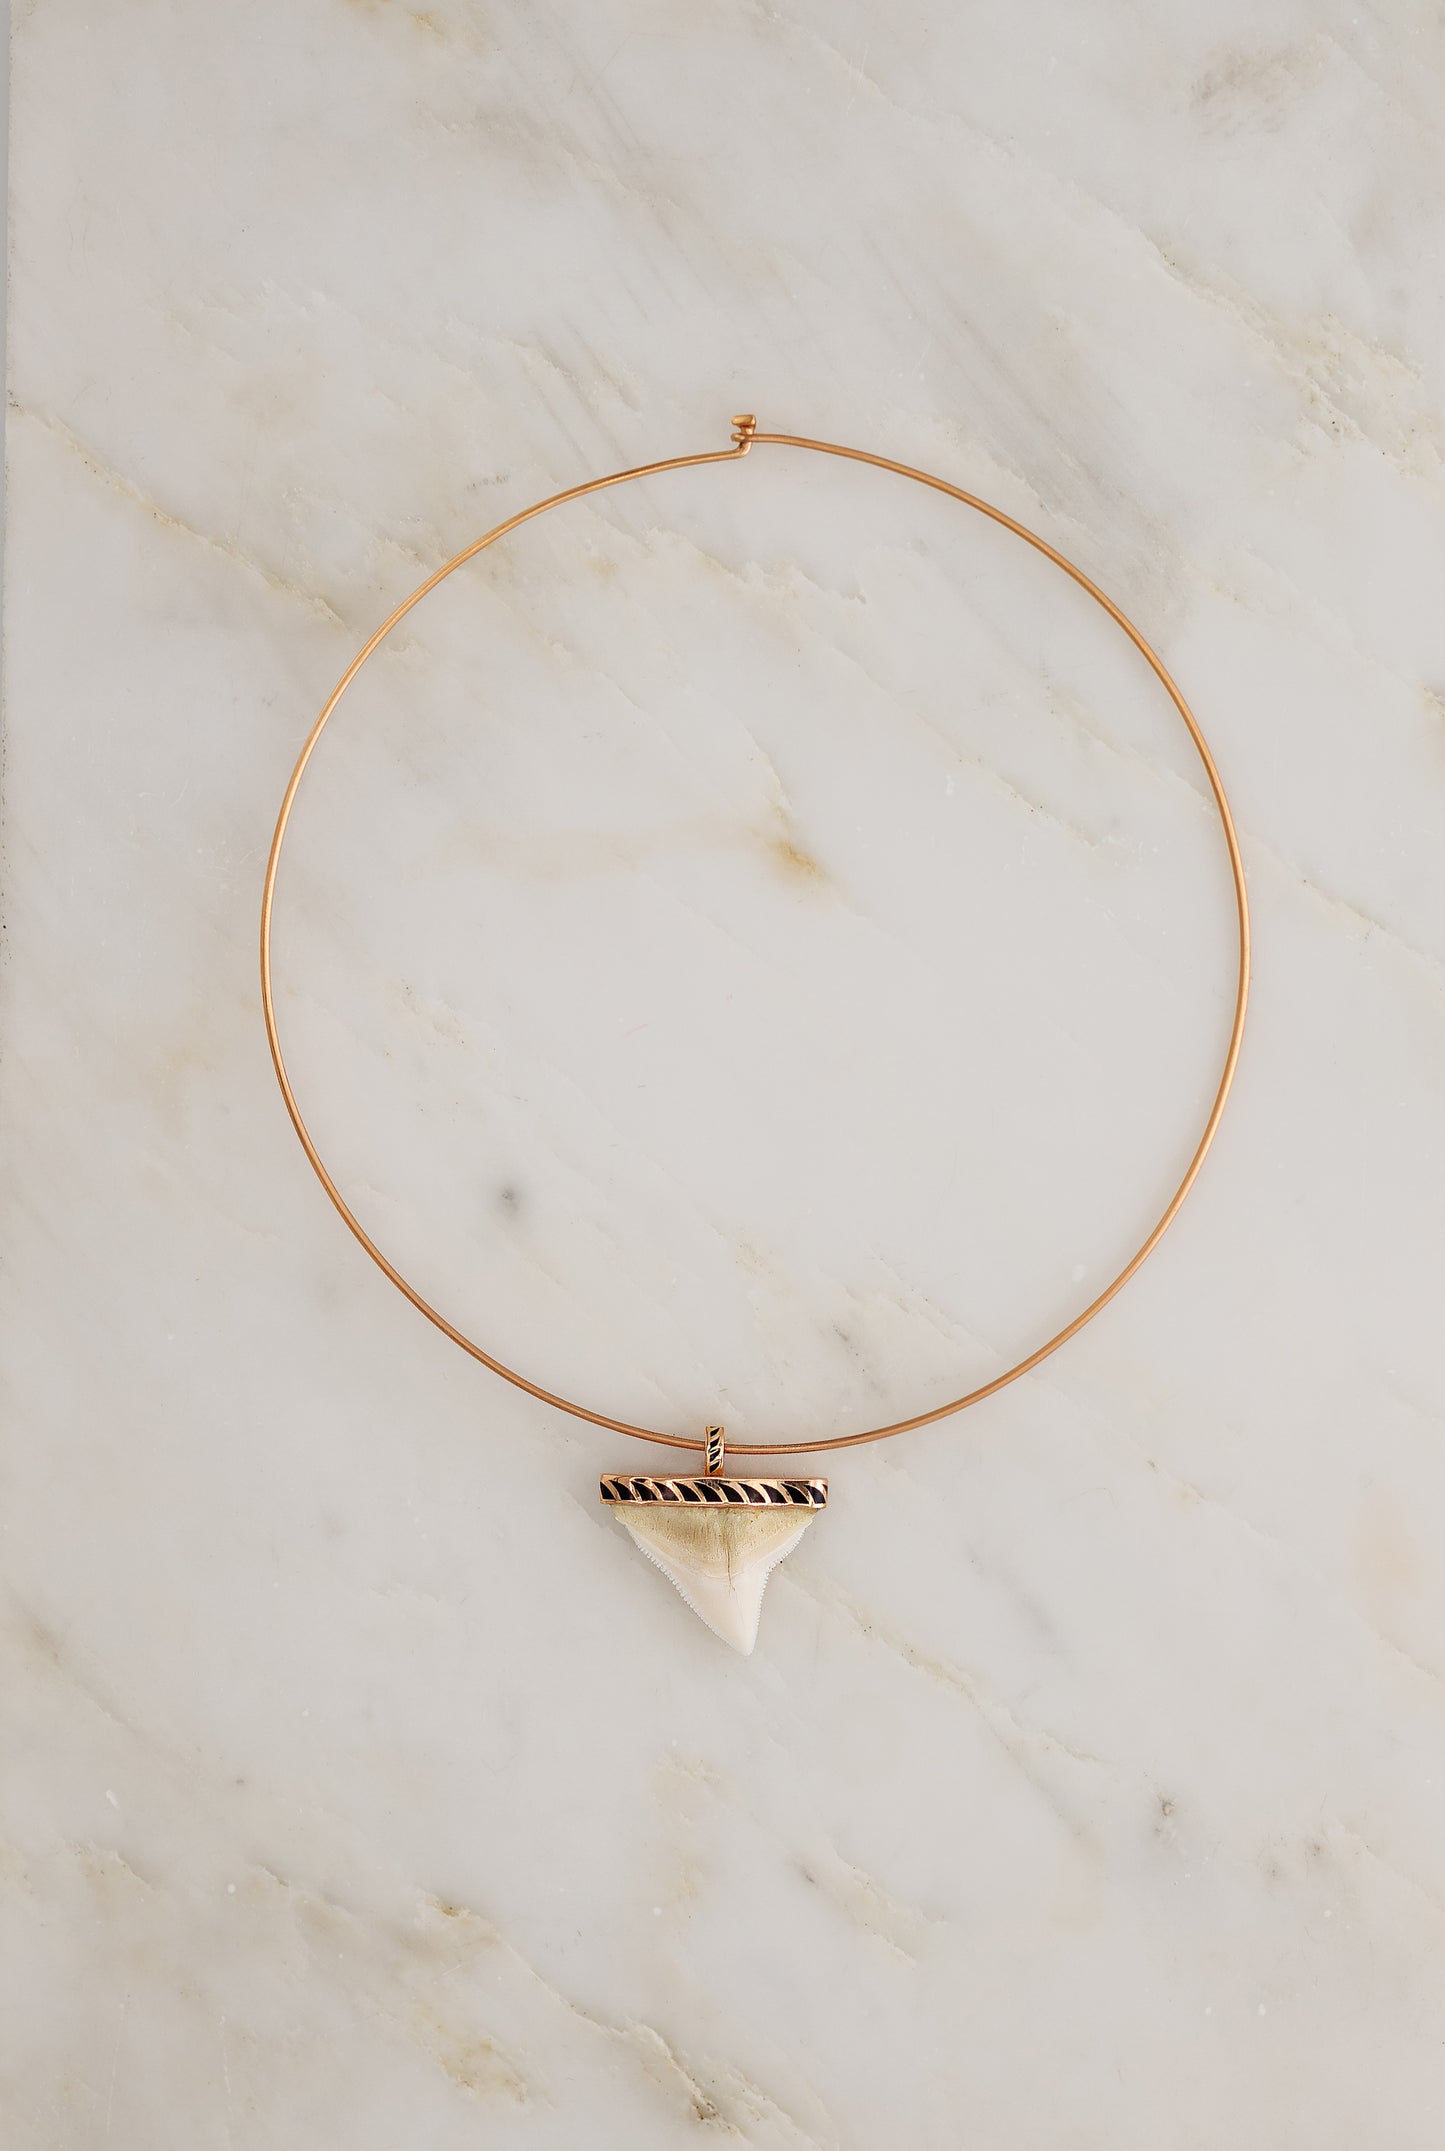 Grande Shark Tooth with Shark Fin Enameling